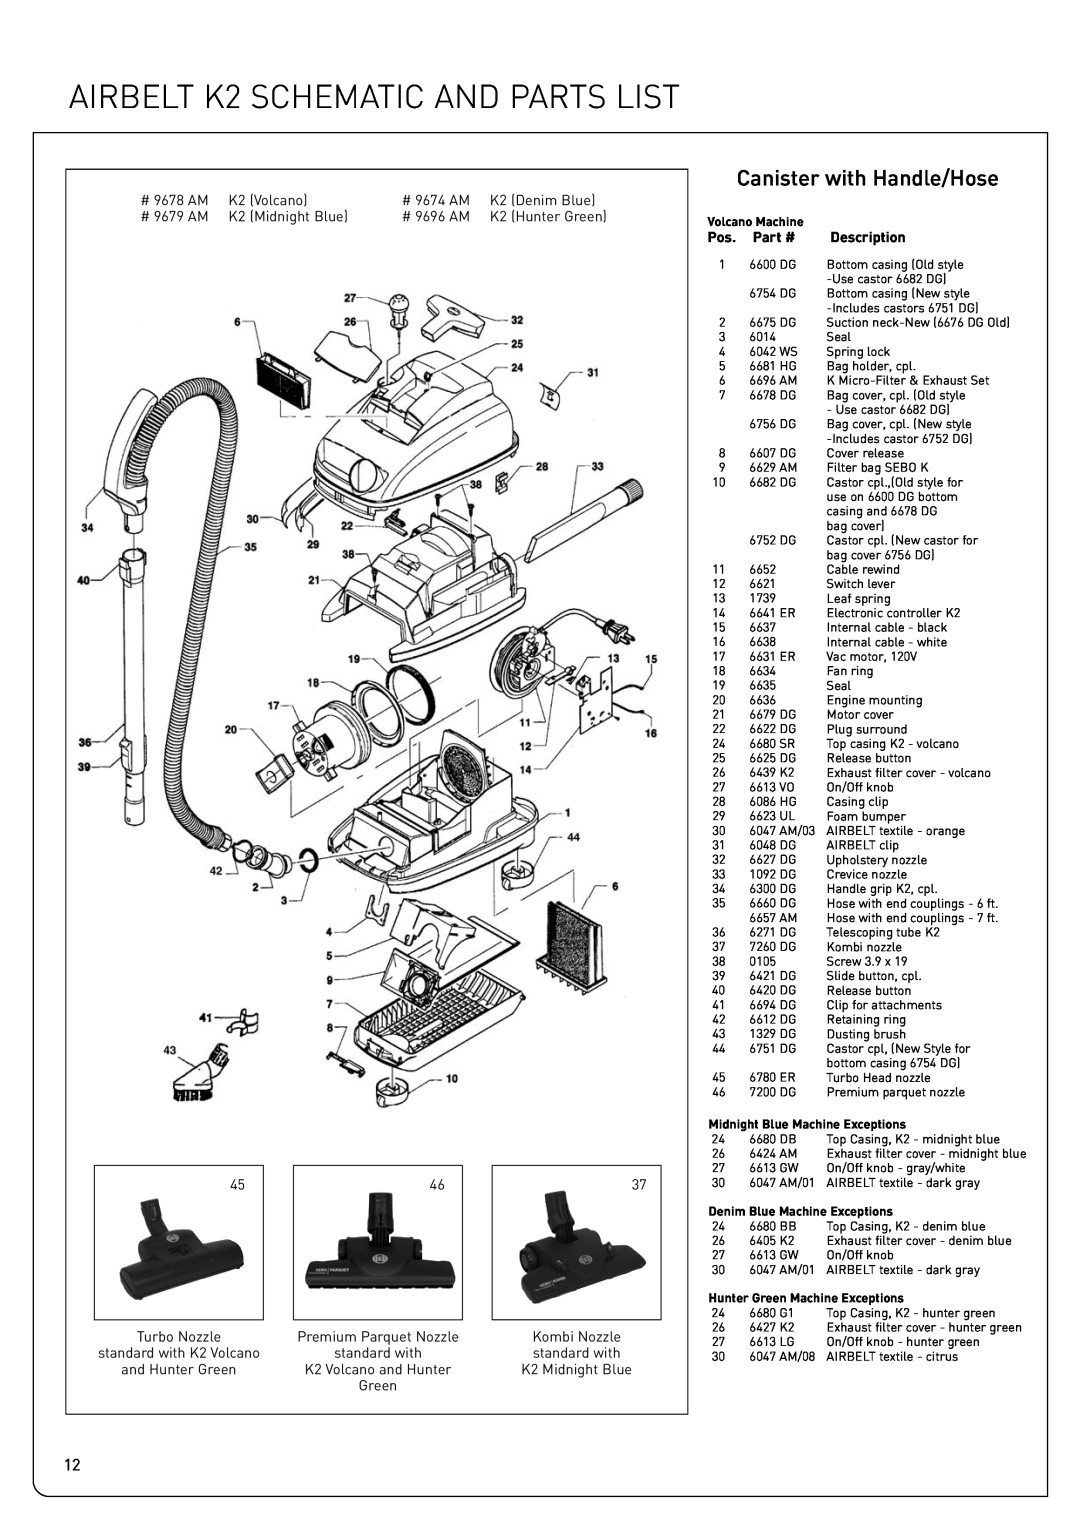 Sebo owner manual AIRBELT K2 SCHEMATIC AND PARTS LIST, Canister with Handle/Hose, Description 